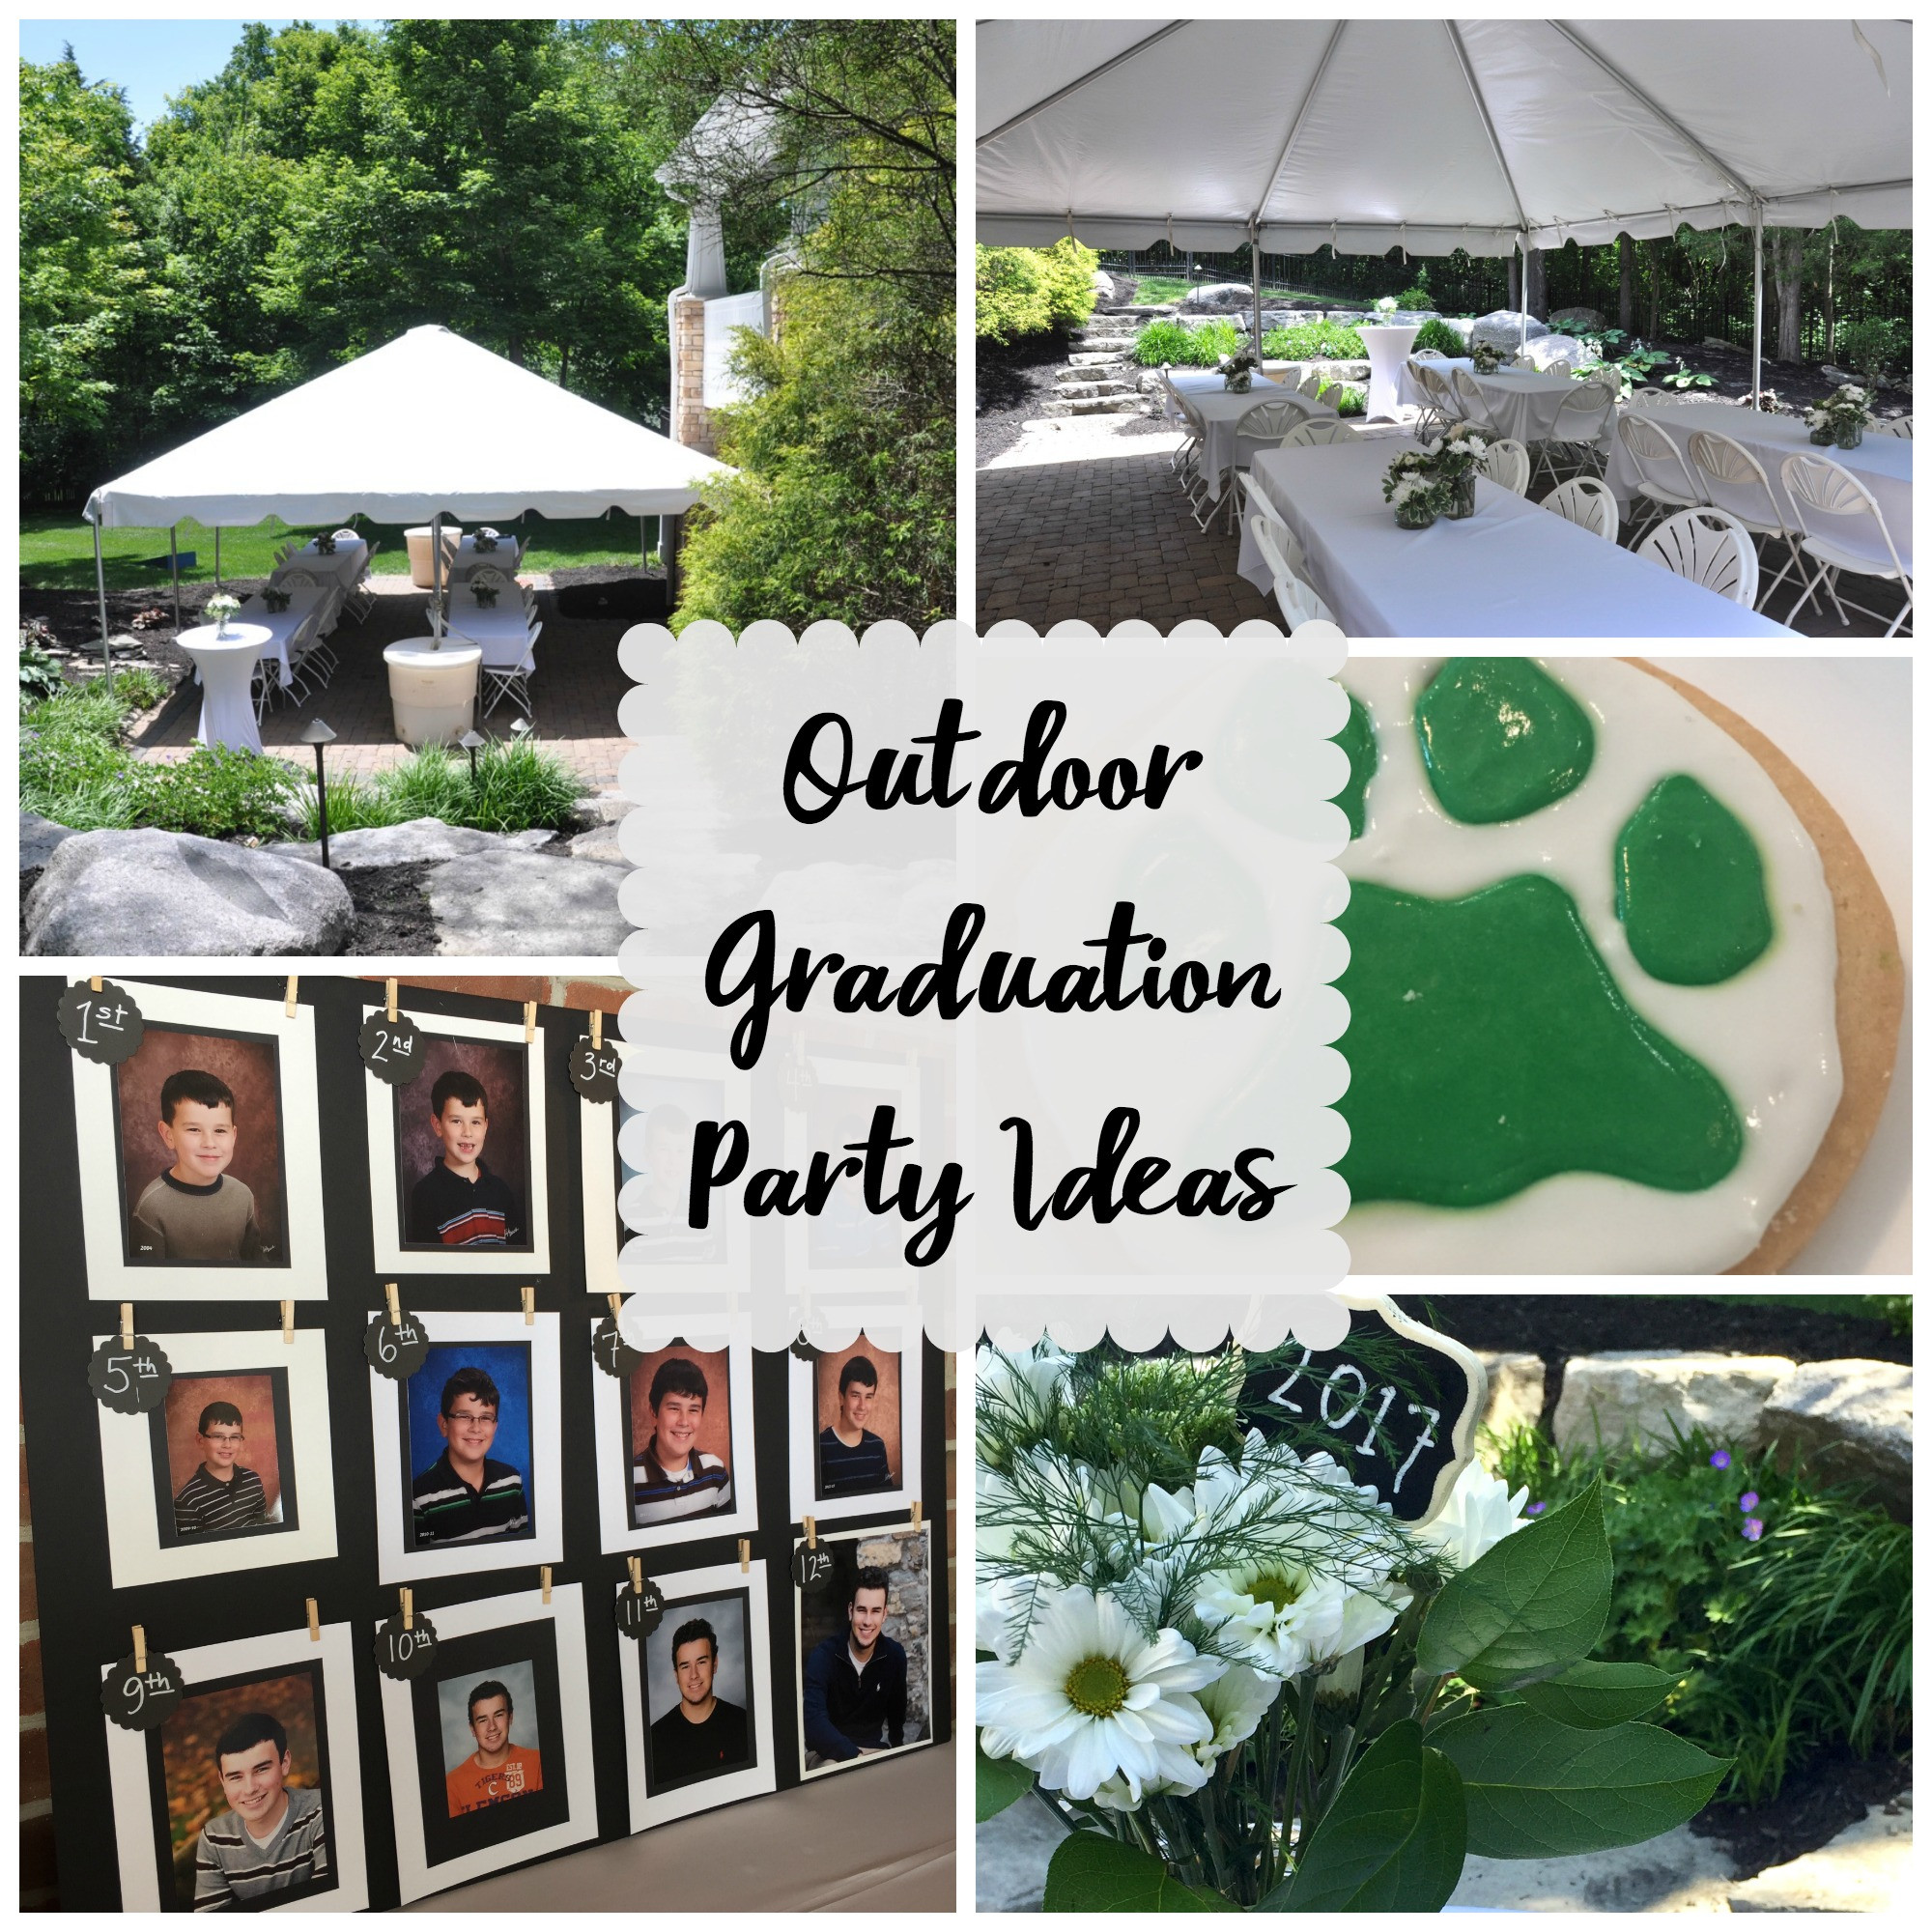 Images Of Graduation Party Ideas
 Outdoor Graduation Party Evolution of Style